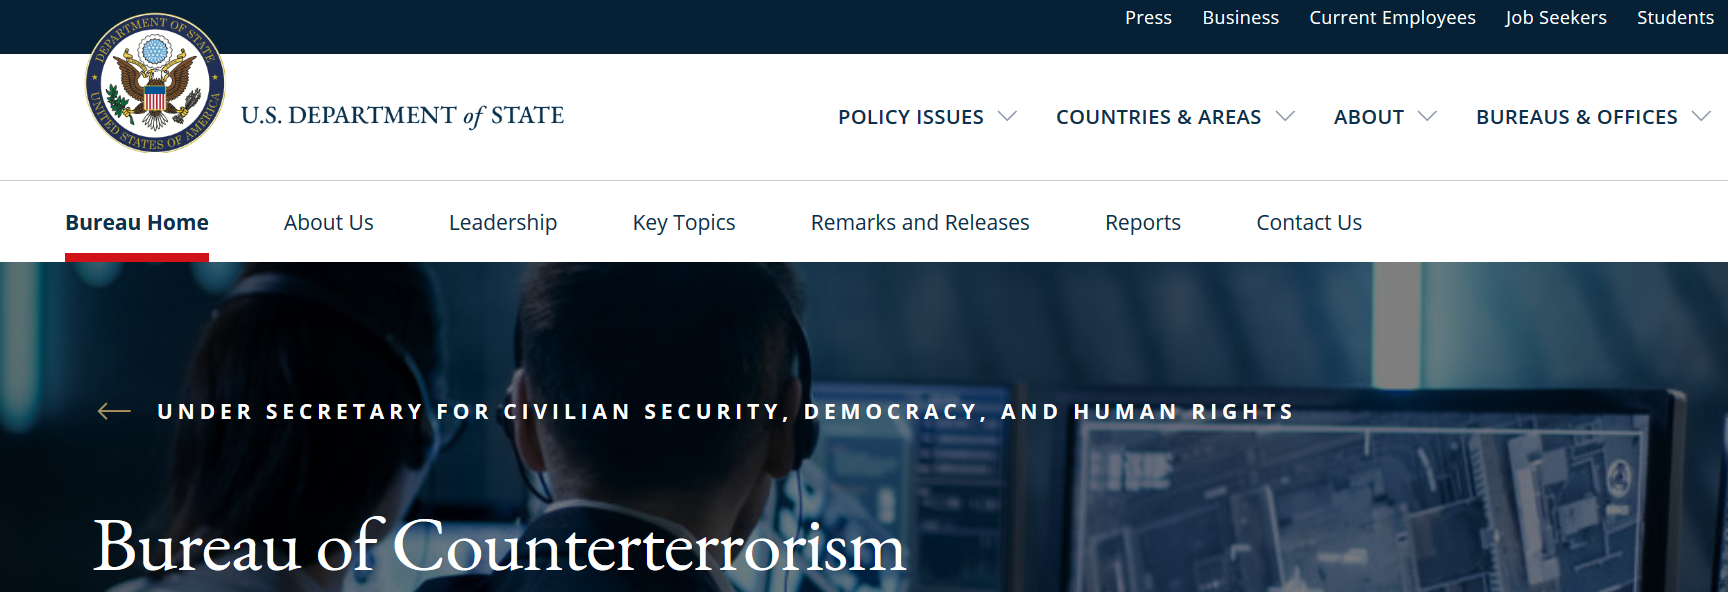 State dept has counterterrorism too web page banner headline.png